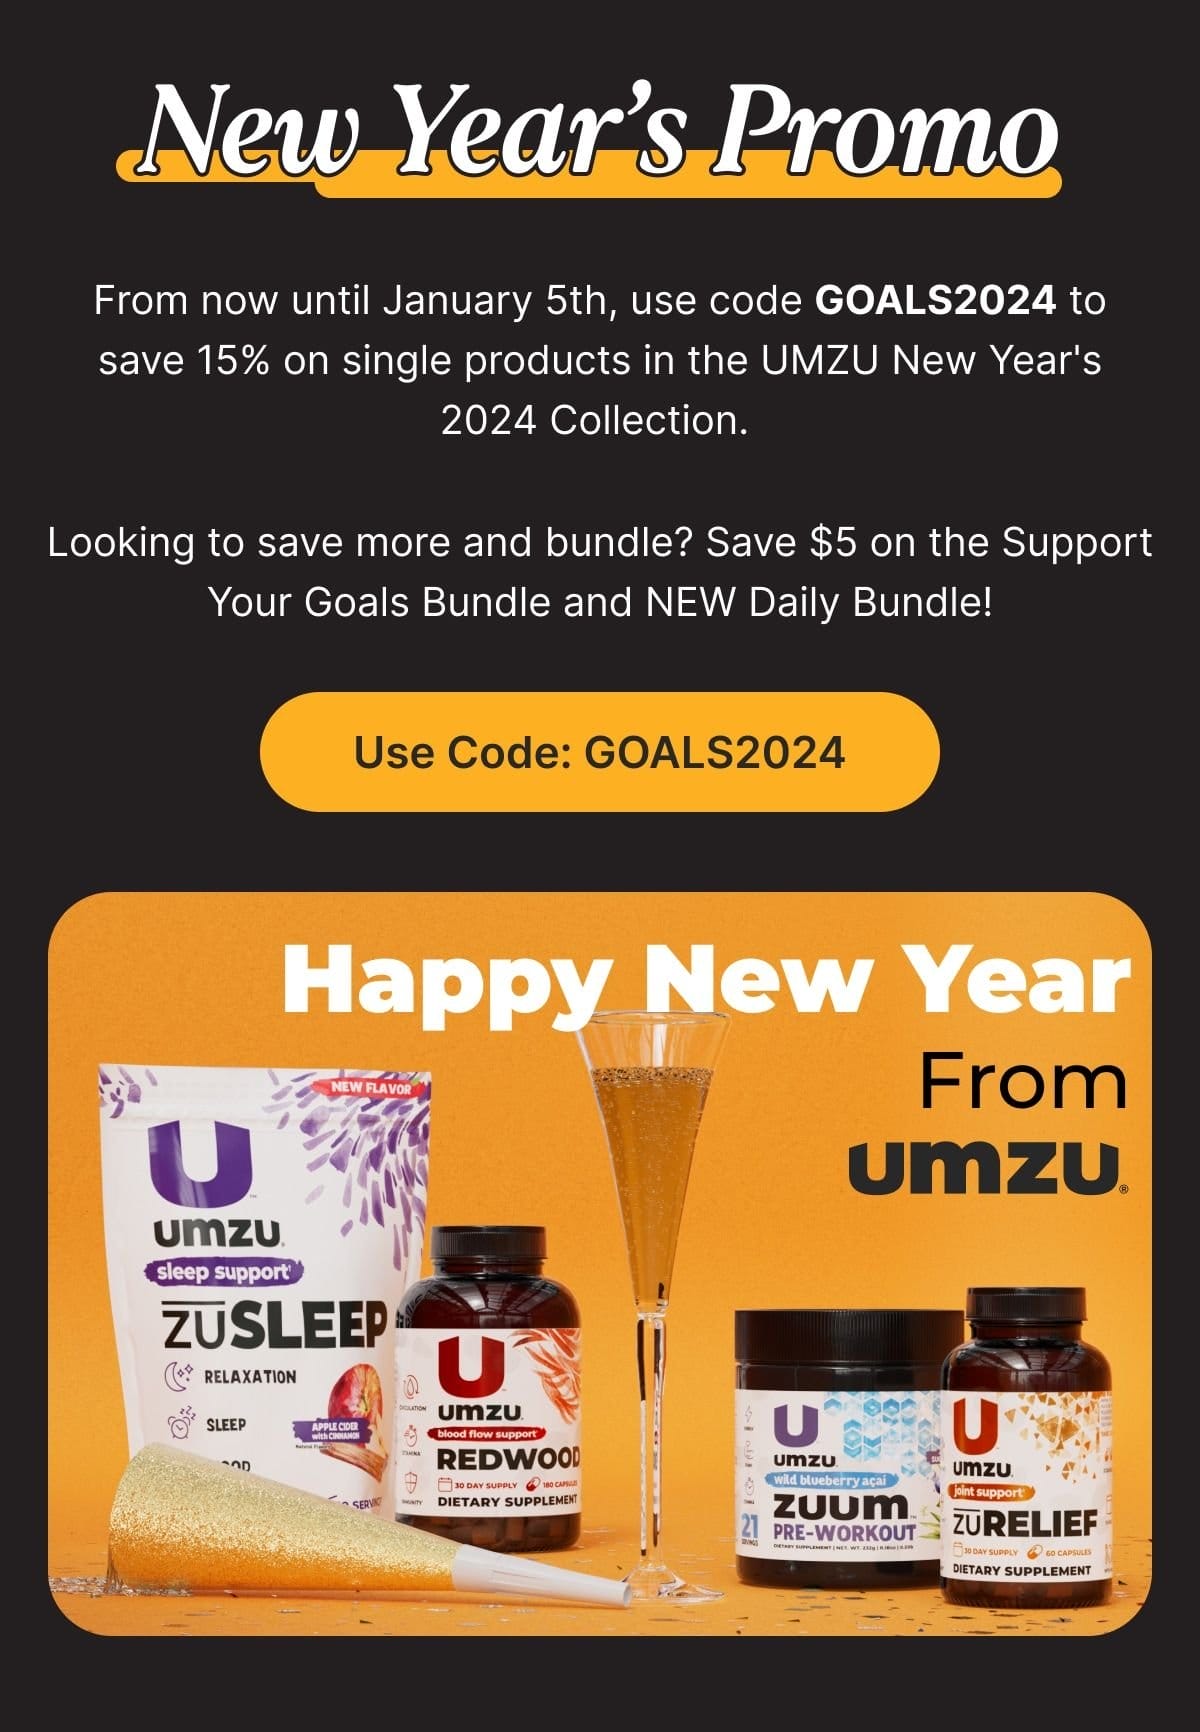 New Year's Promo